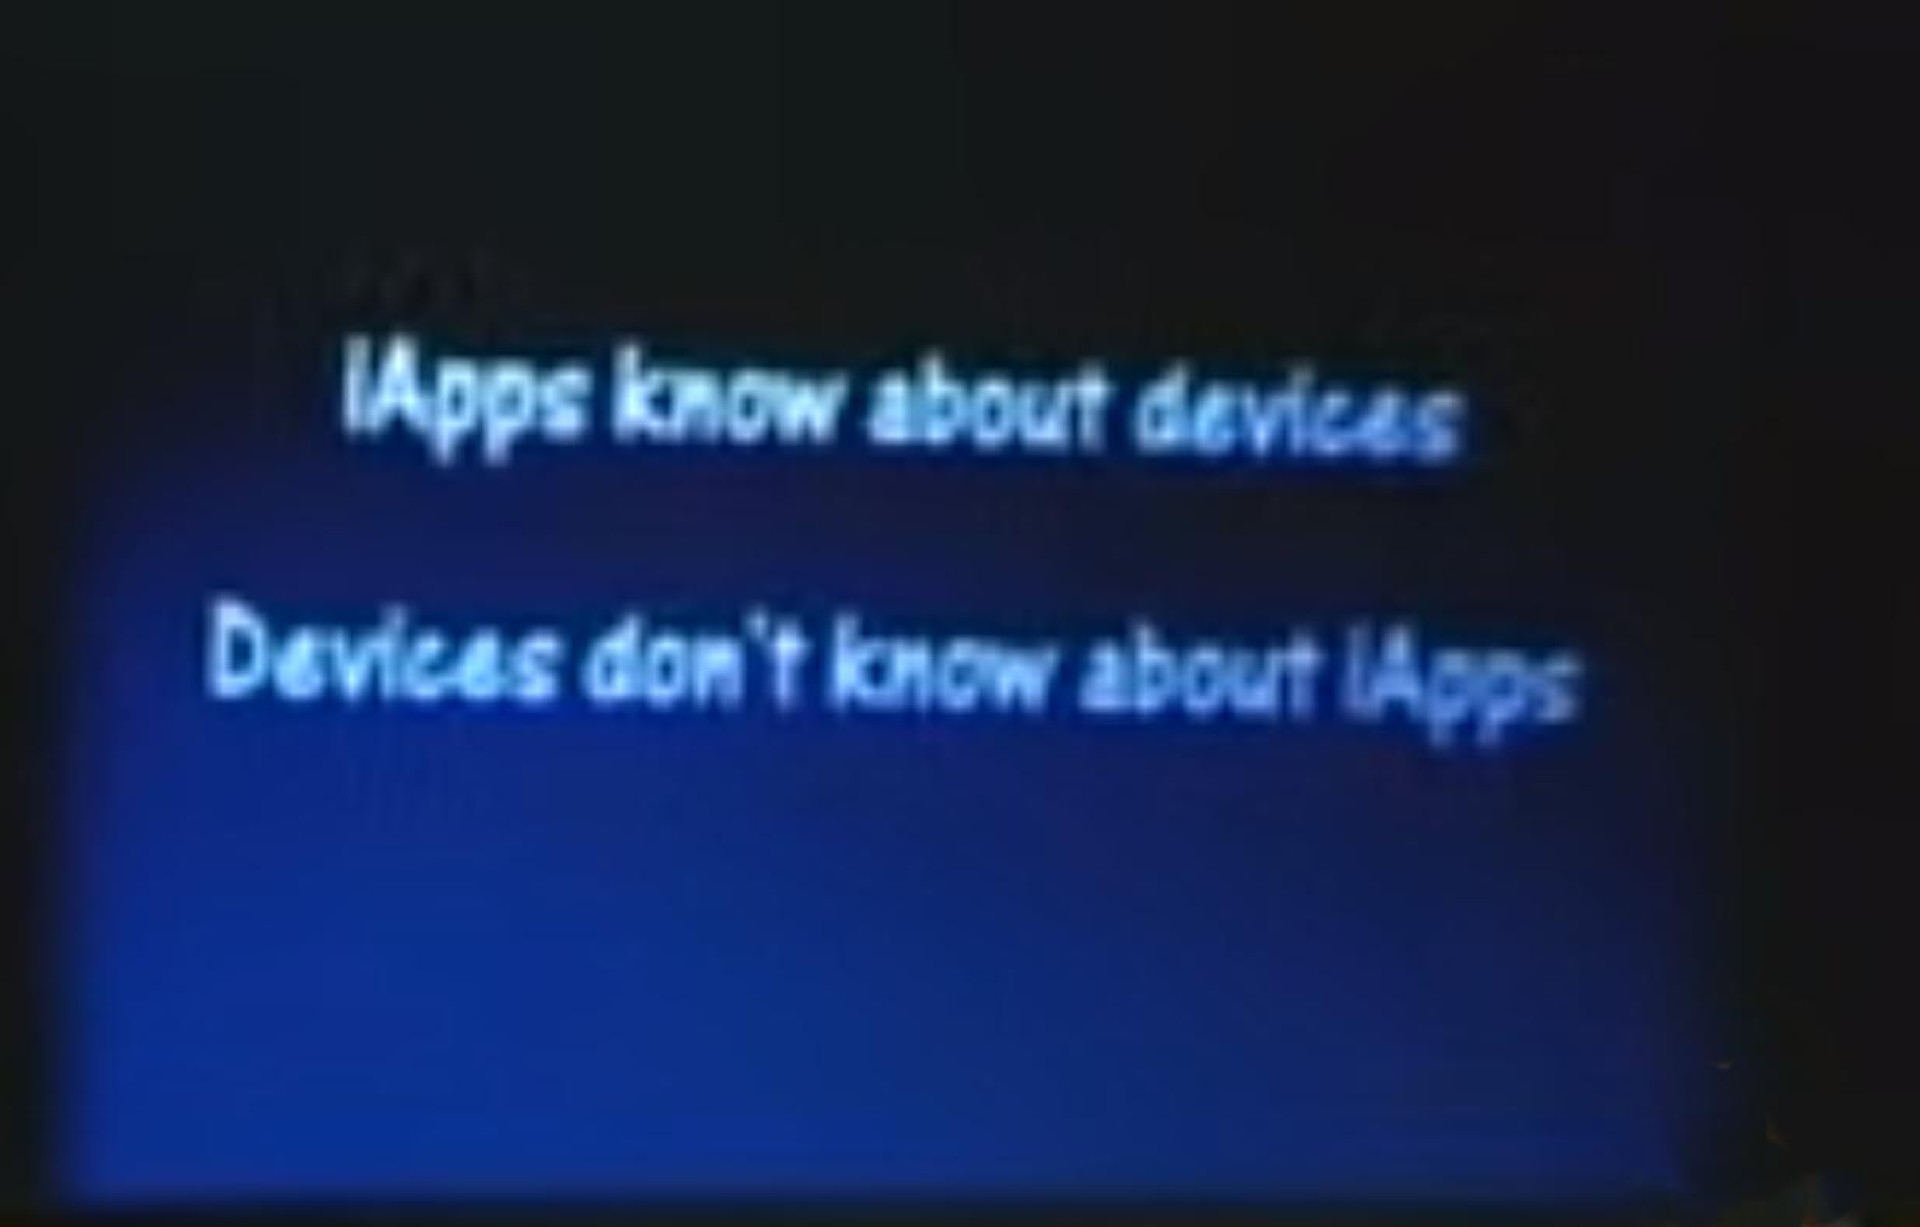 know about devices devices don know about | Apple